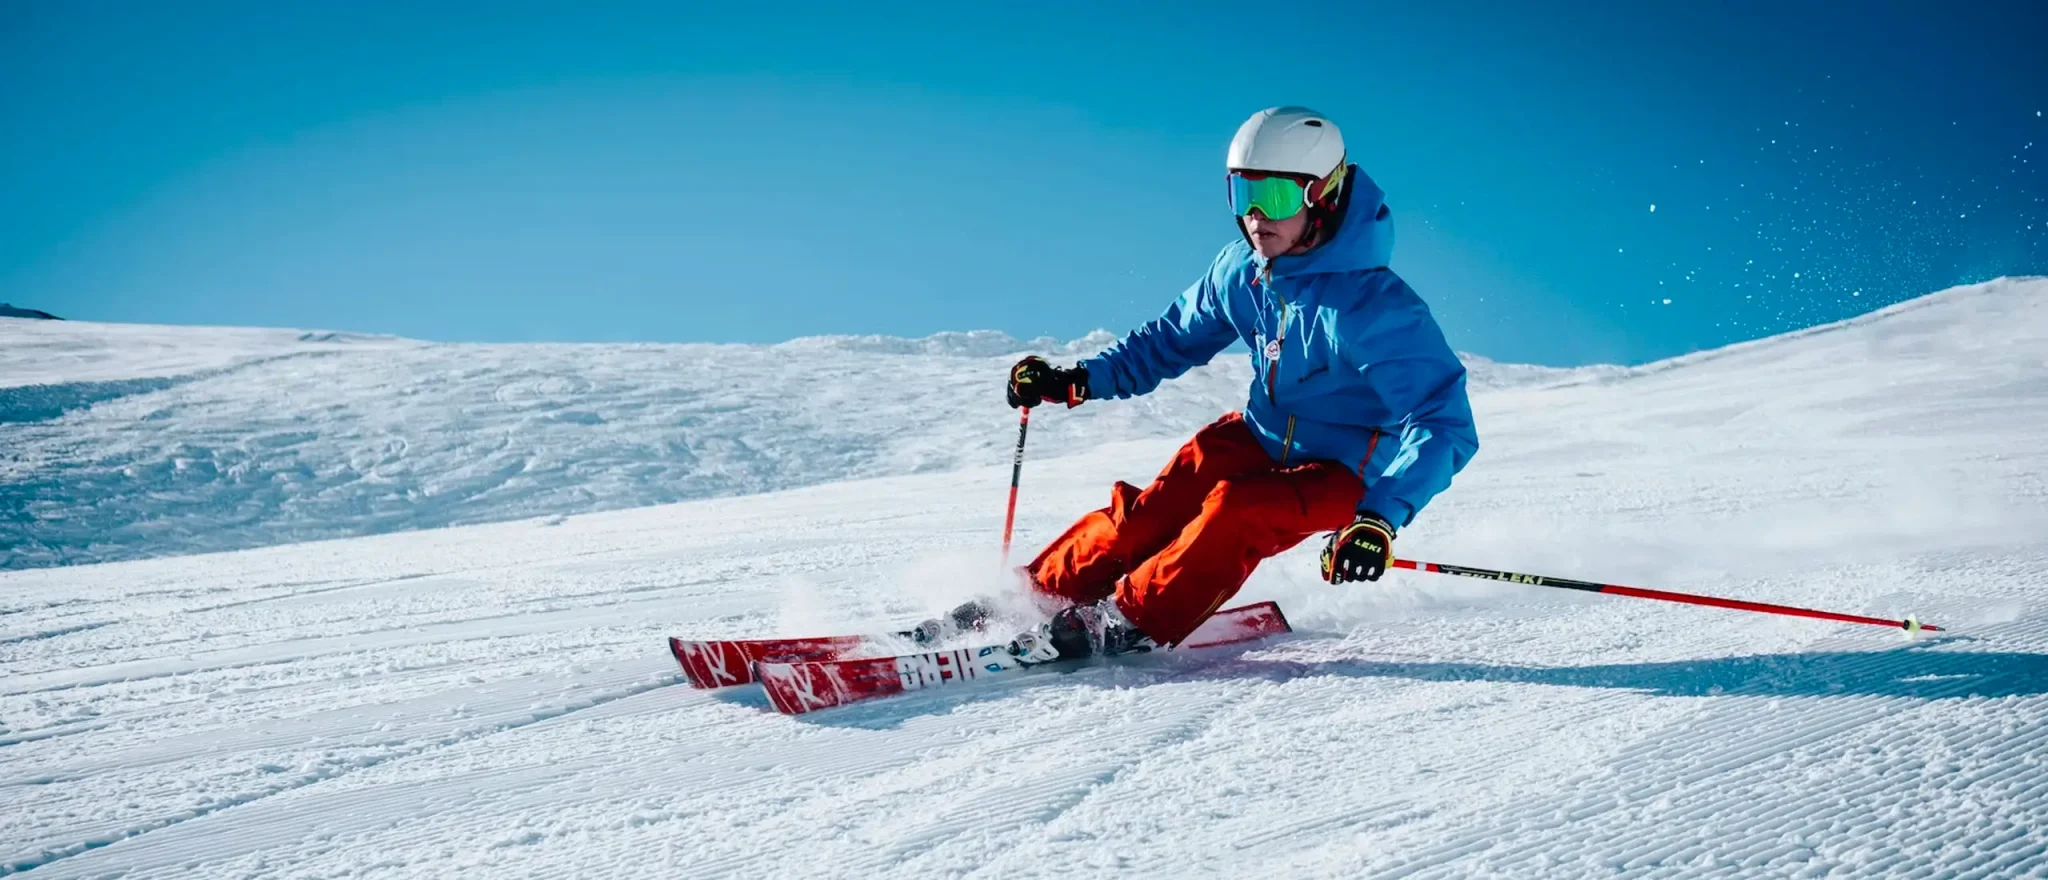 How Many Calories Do You Really Burn Skiing?